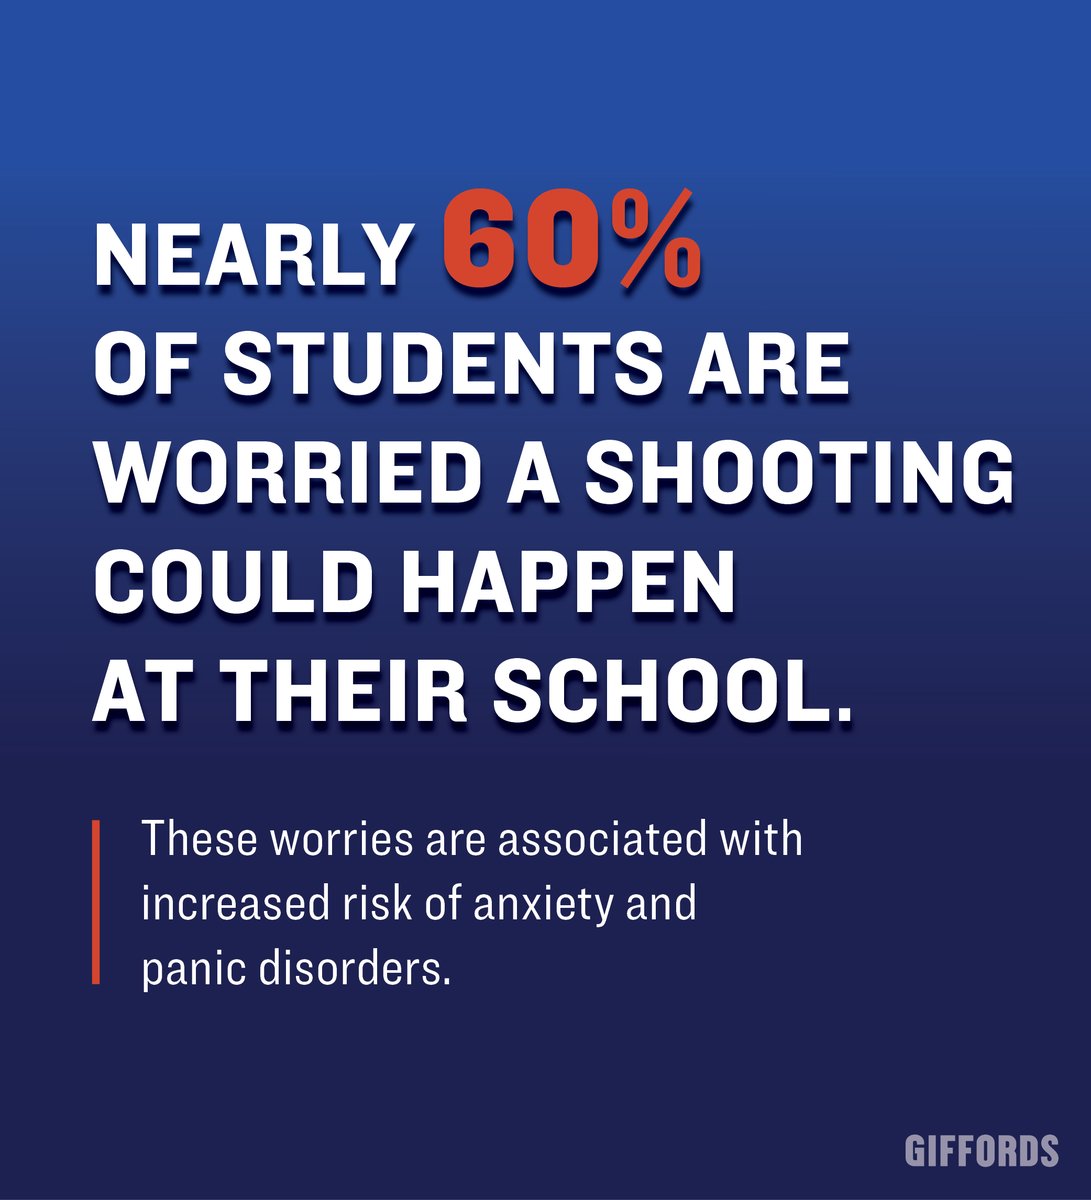 School shootings and lockdown drills should not be the reality our children are forced to live in. But 25 years after Columbine, gun violence has traumatized an entire generation of young people. We must elect more leaders who will put our kids before the gun lobby.